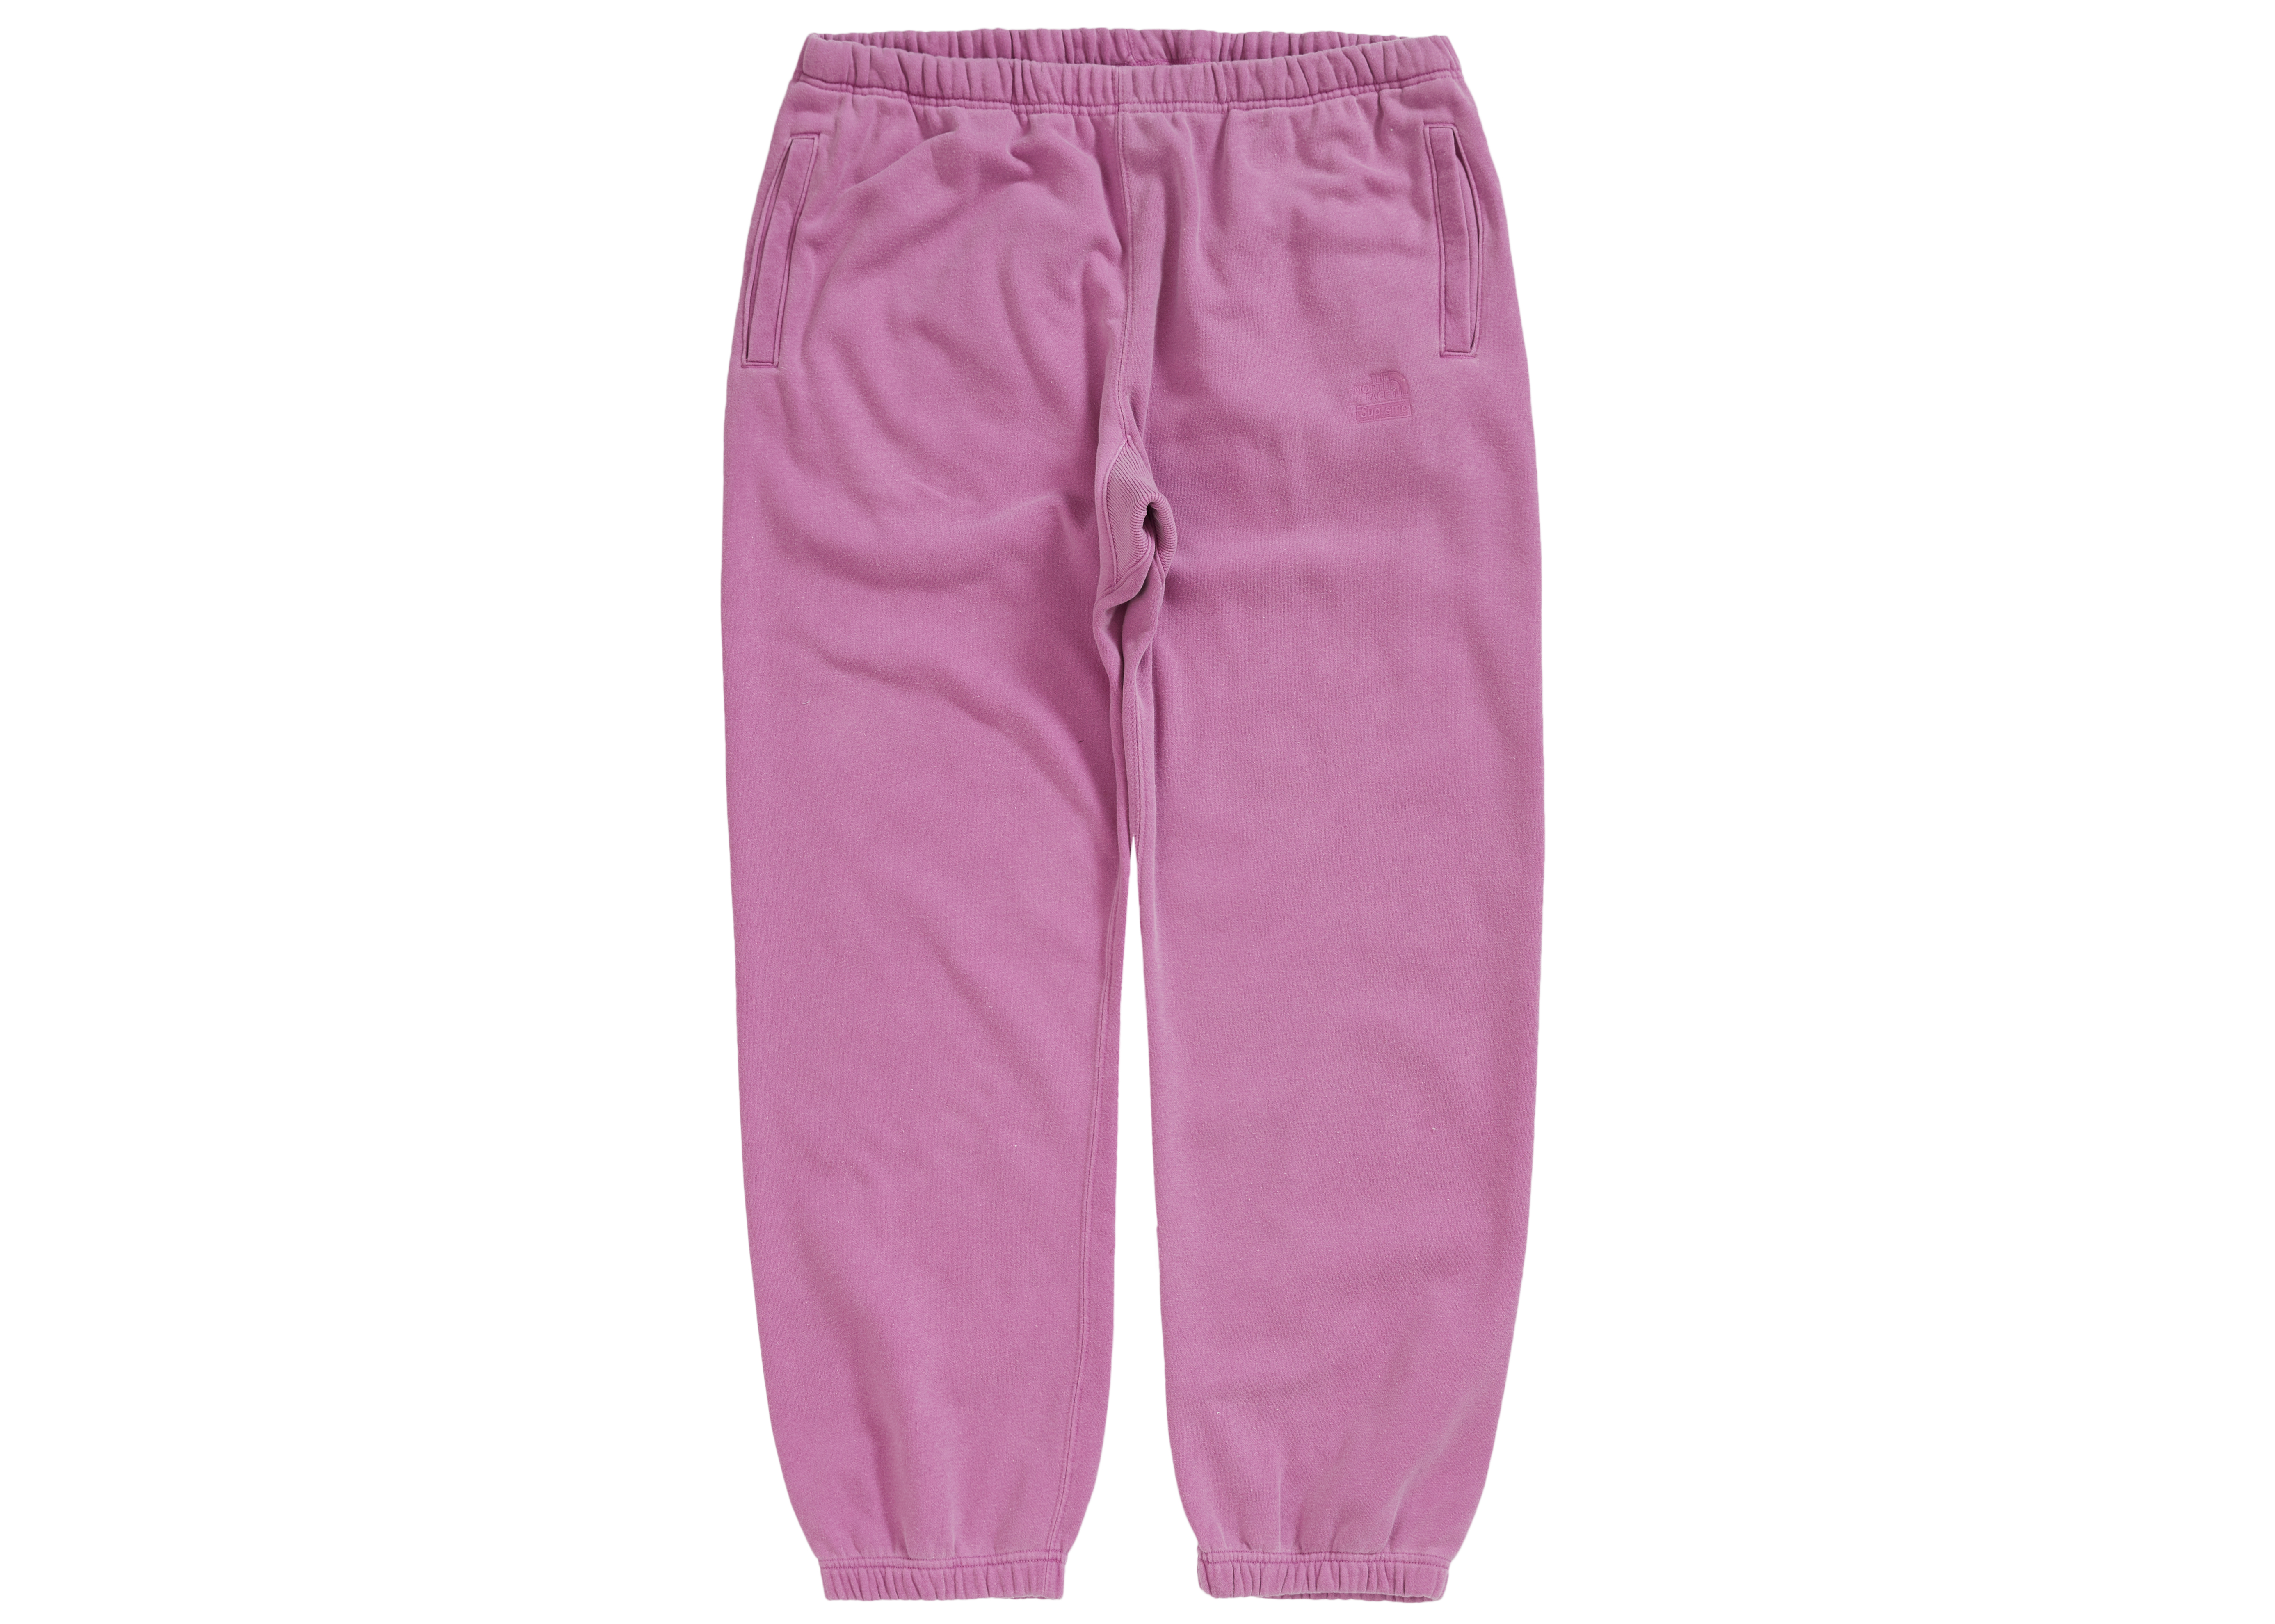 Supreme The North Face Pigment Printed Sweatpant Pink - SS21 Men's